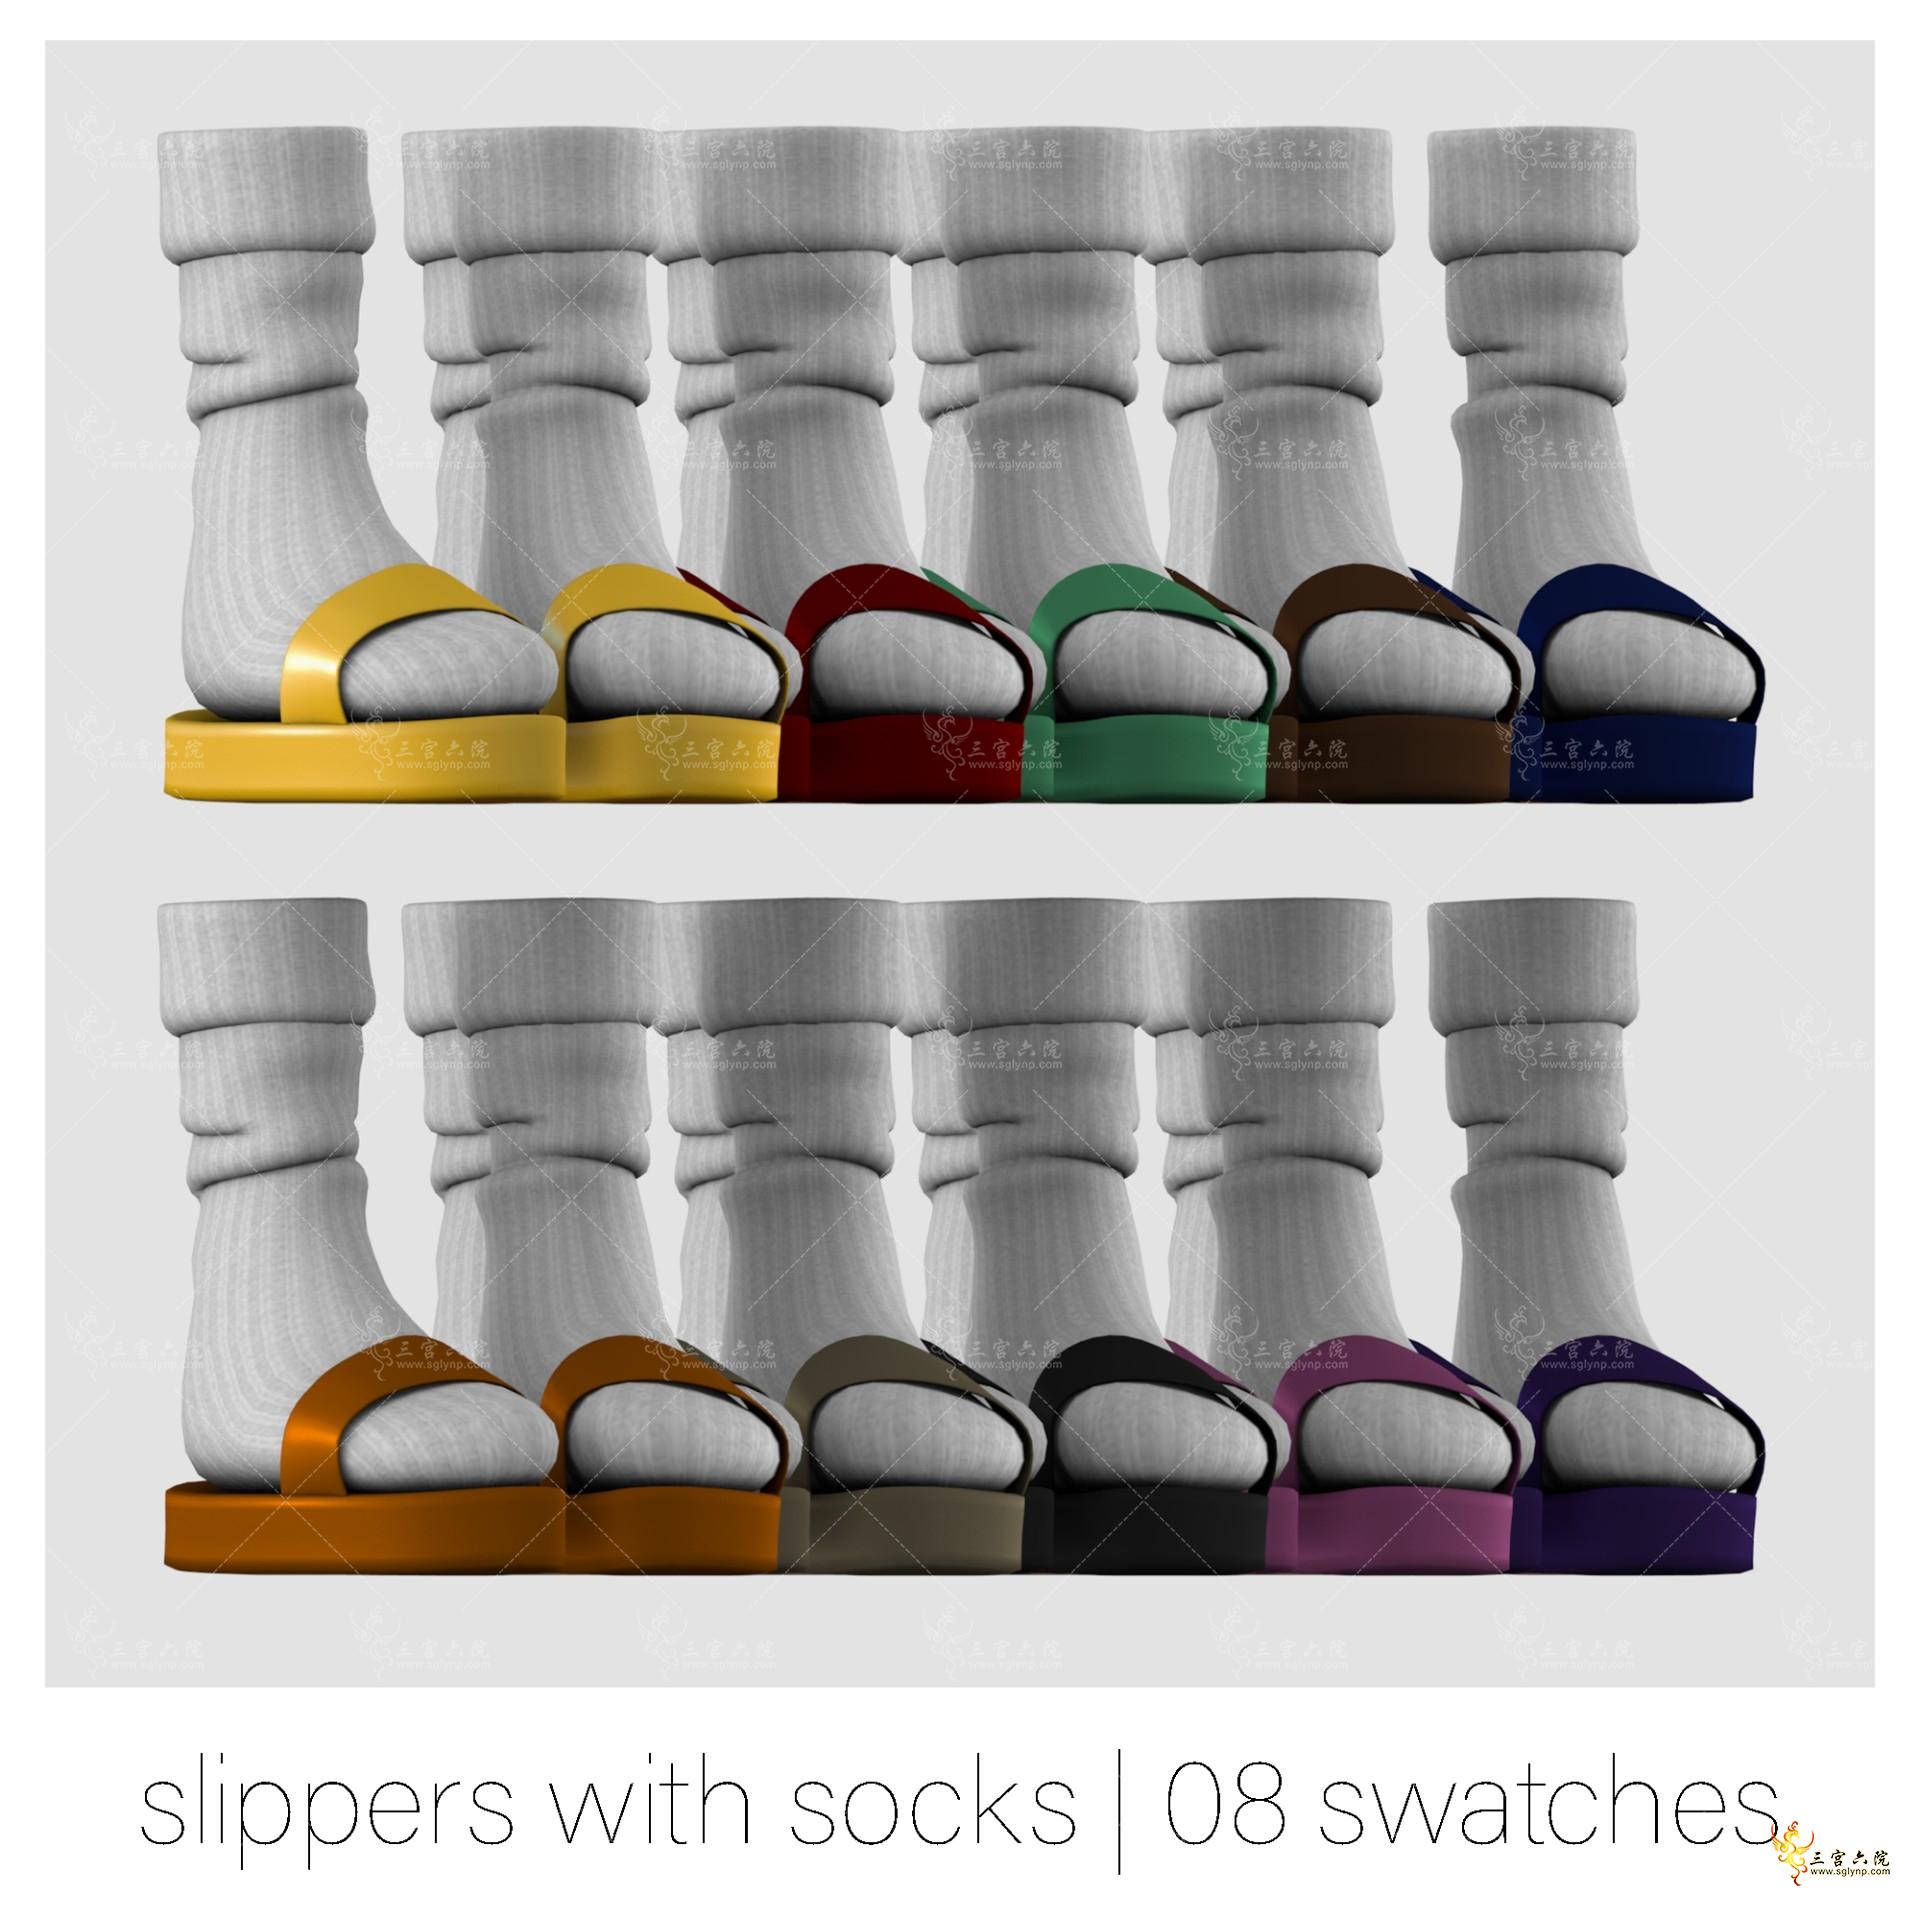 slipperswithsocks_swatches.png